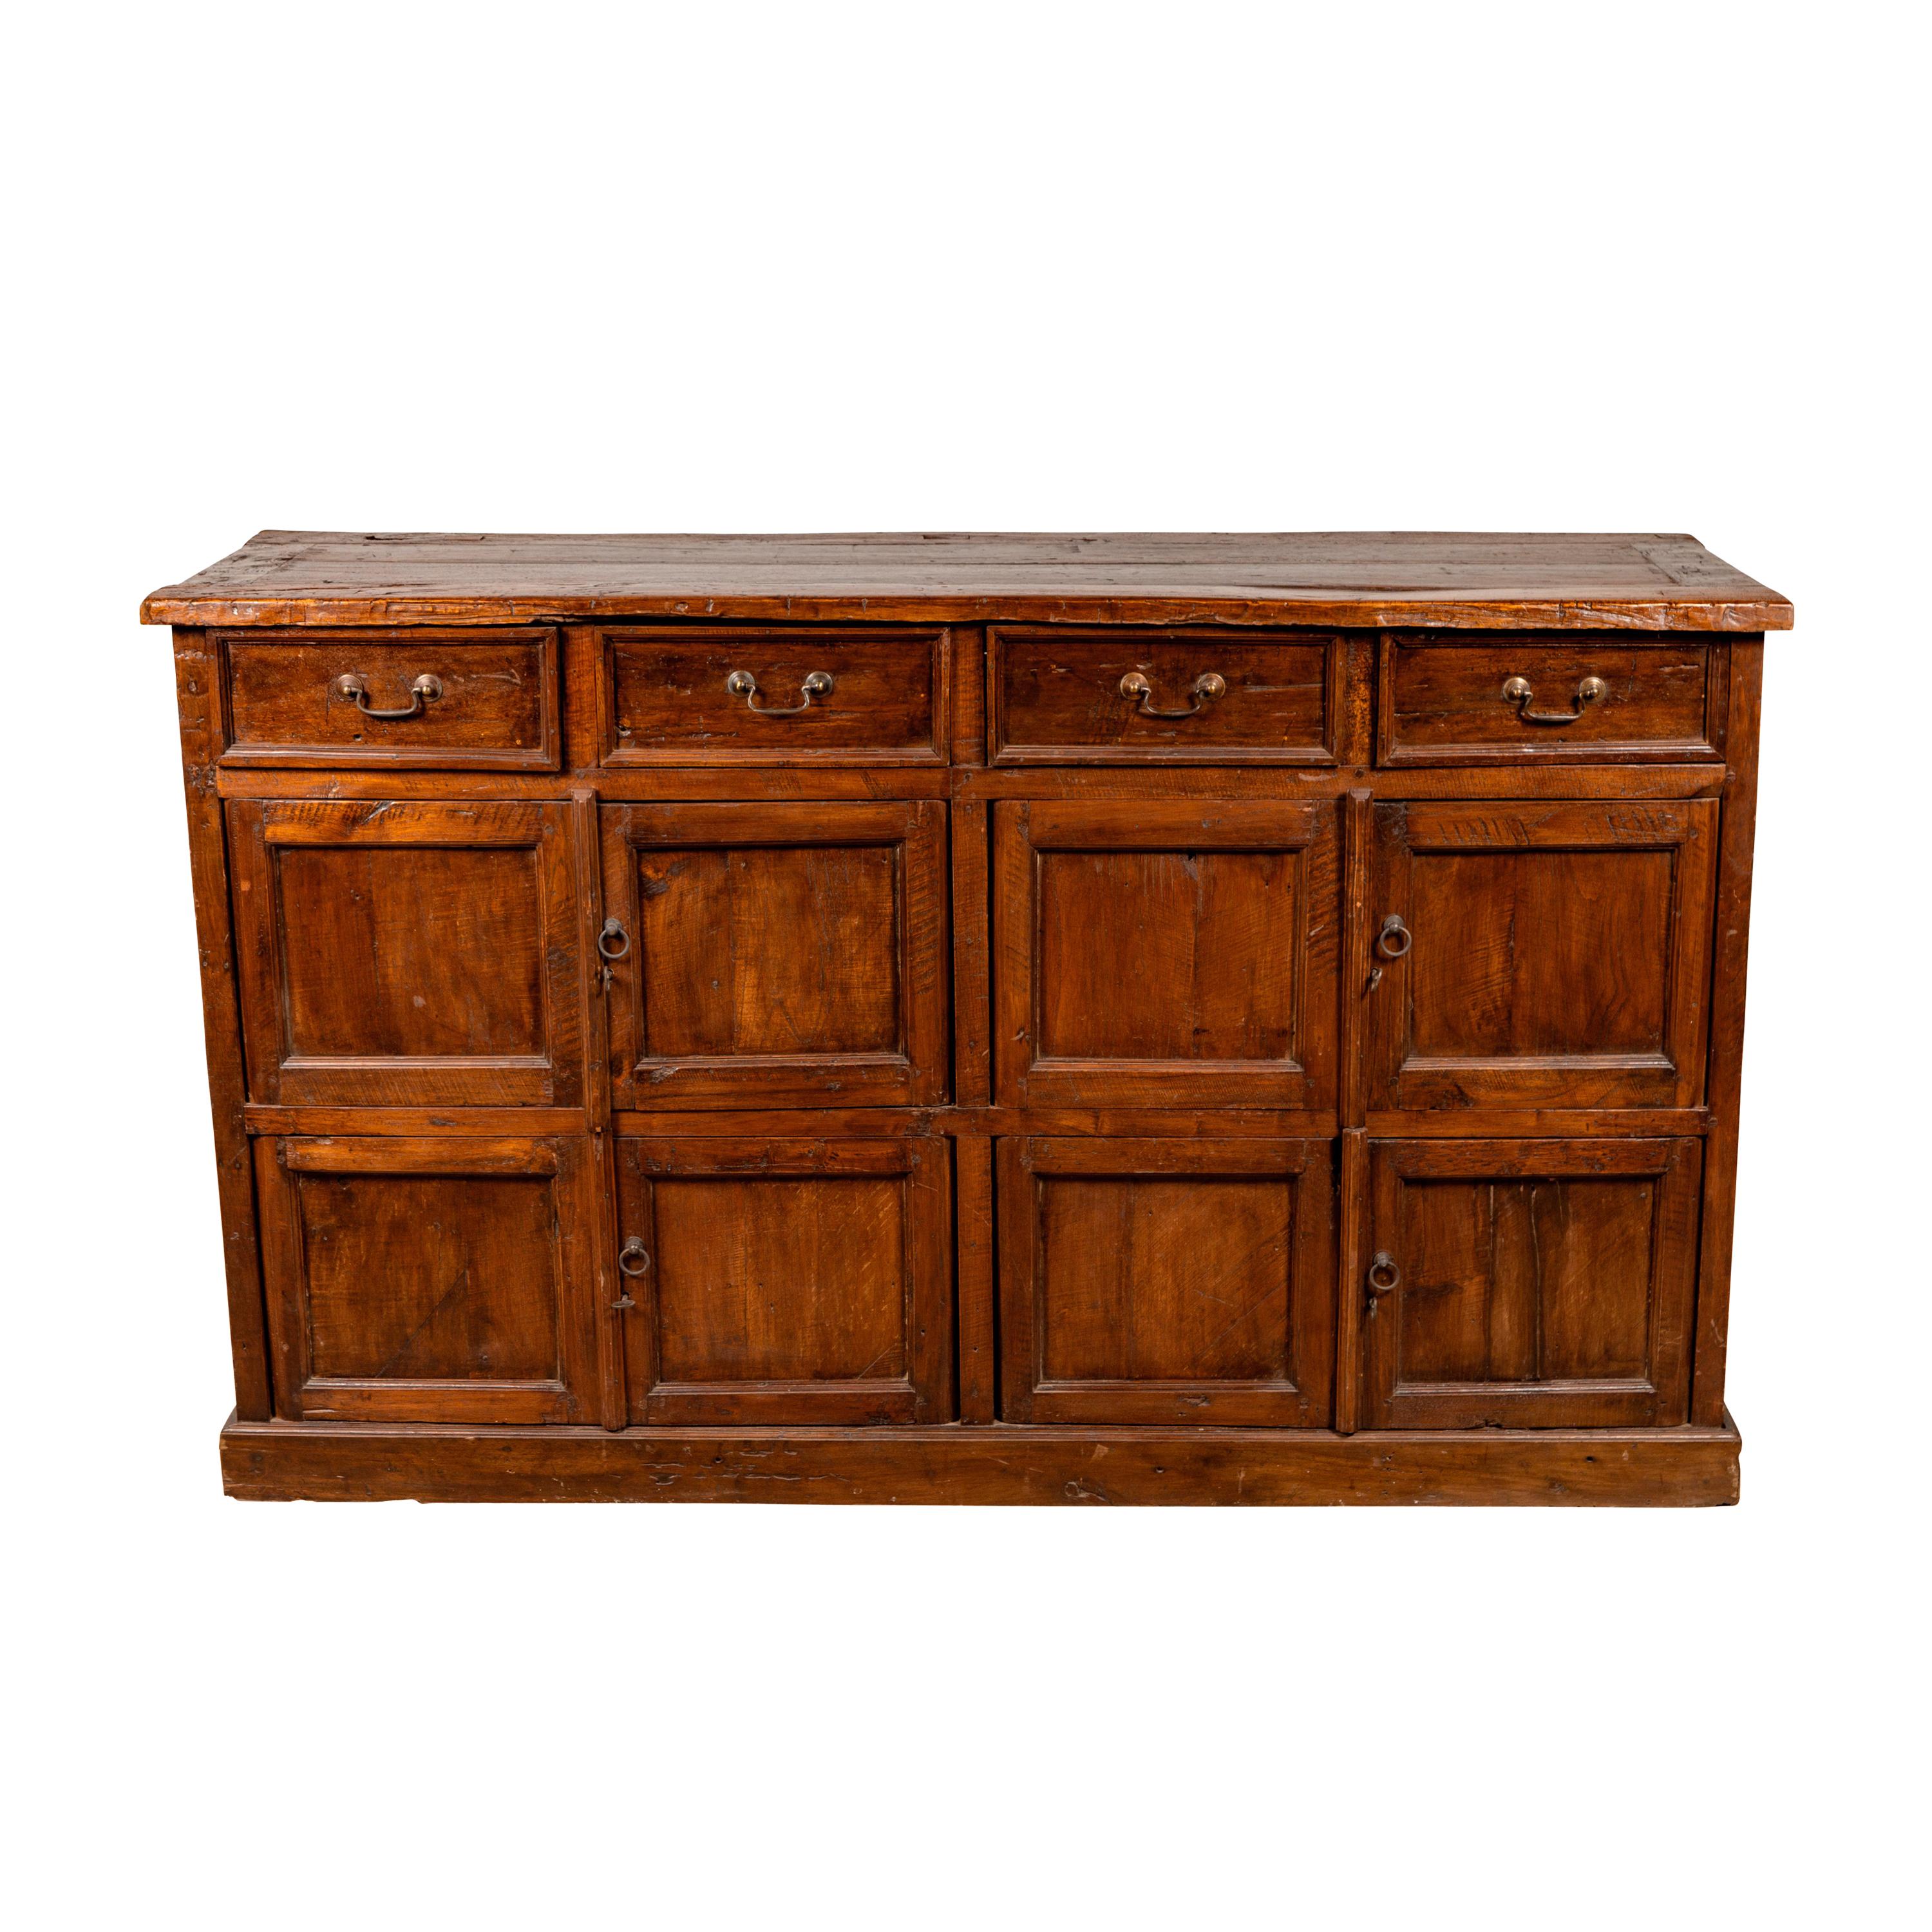 Large Teak Cabinet from Java, with Four Drawers and Four Sets of Double Doors